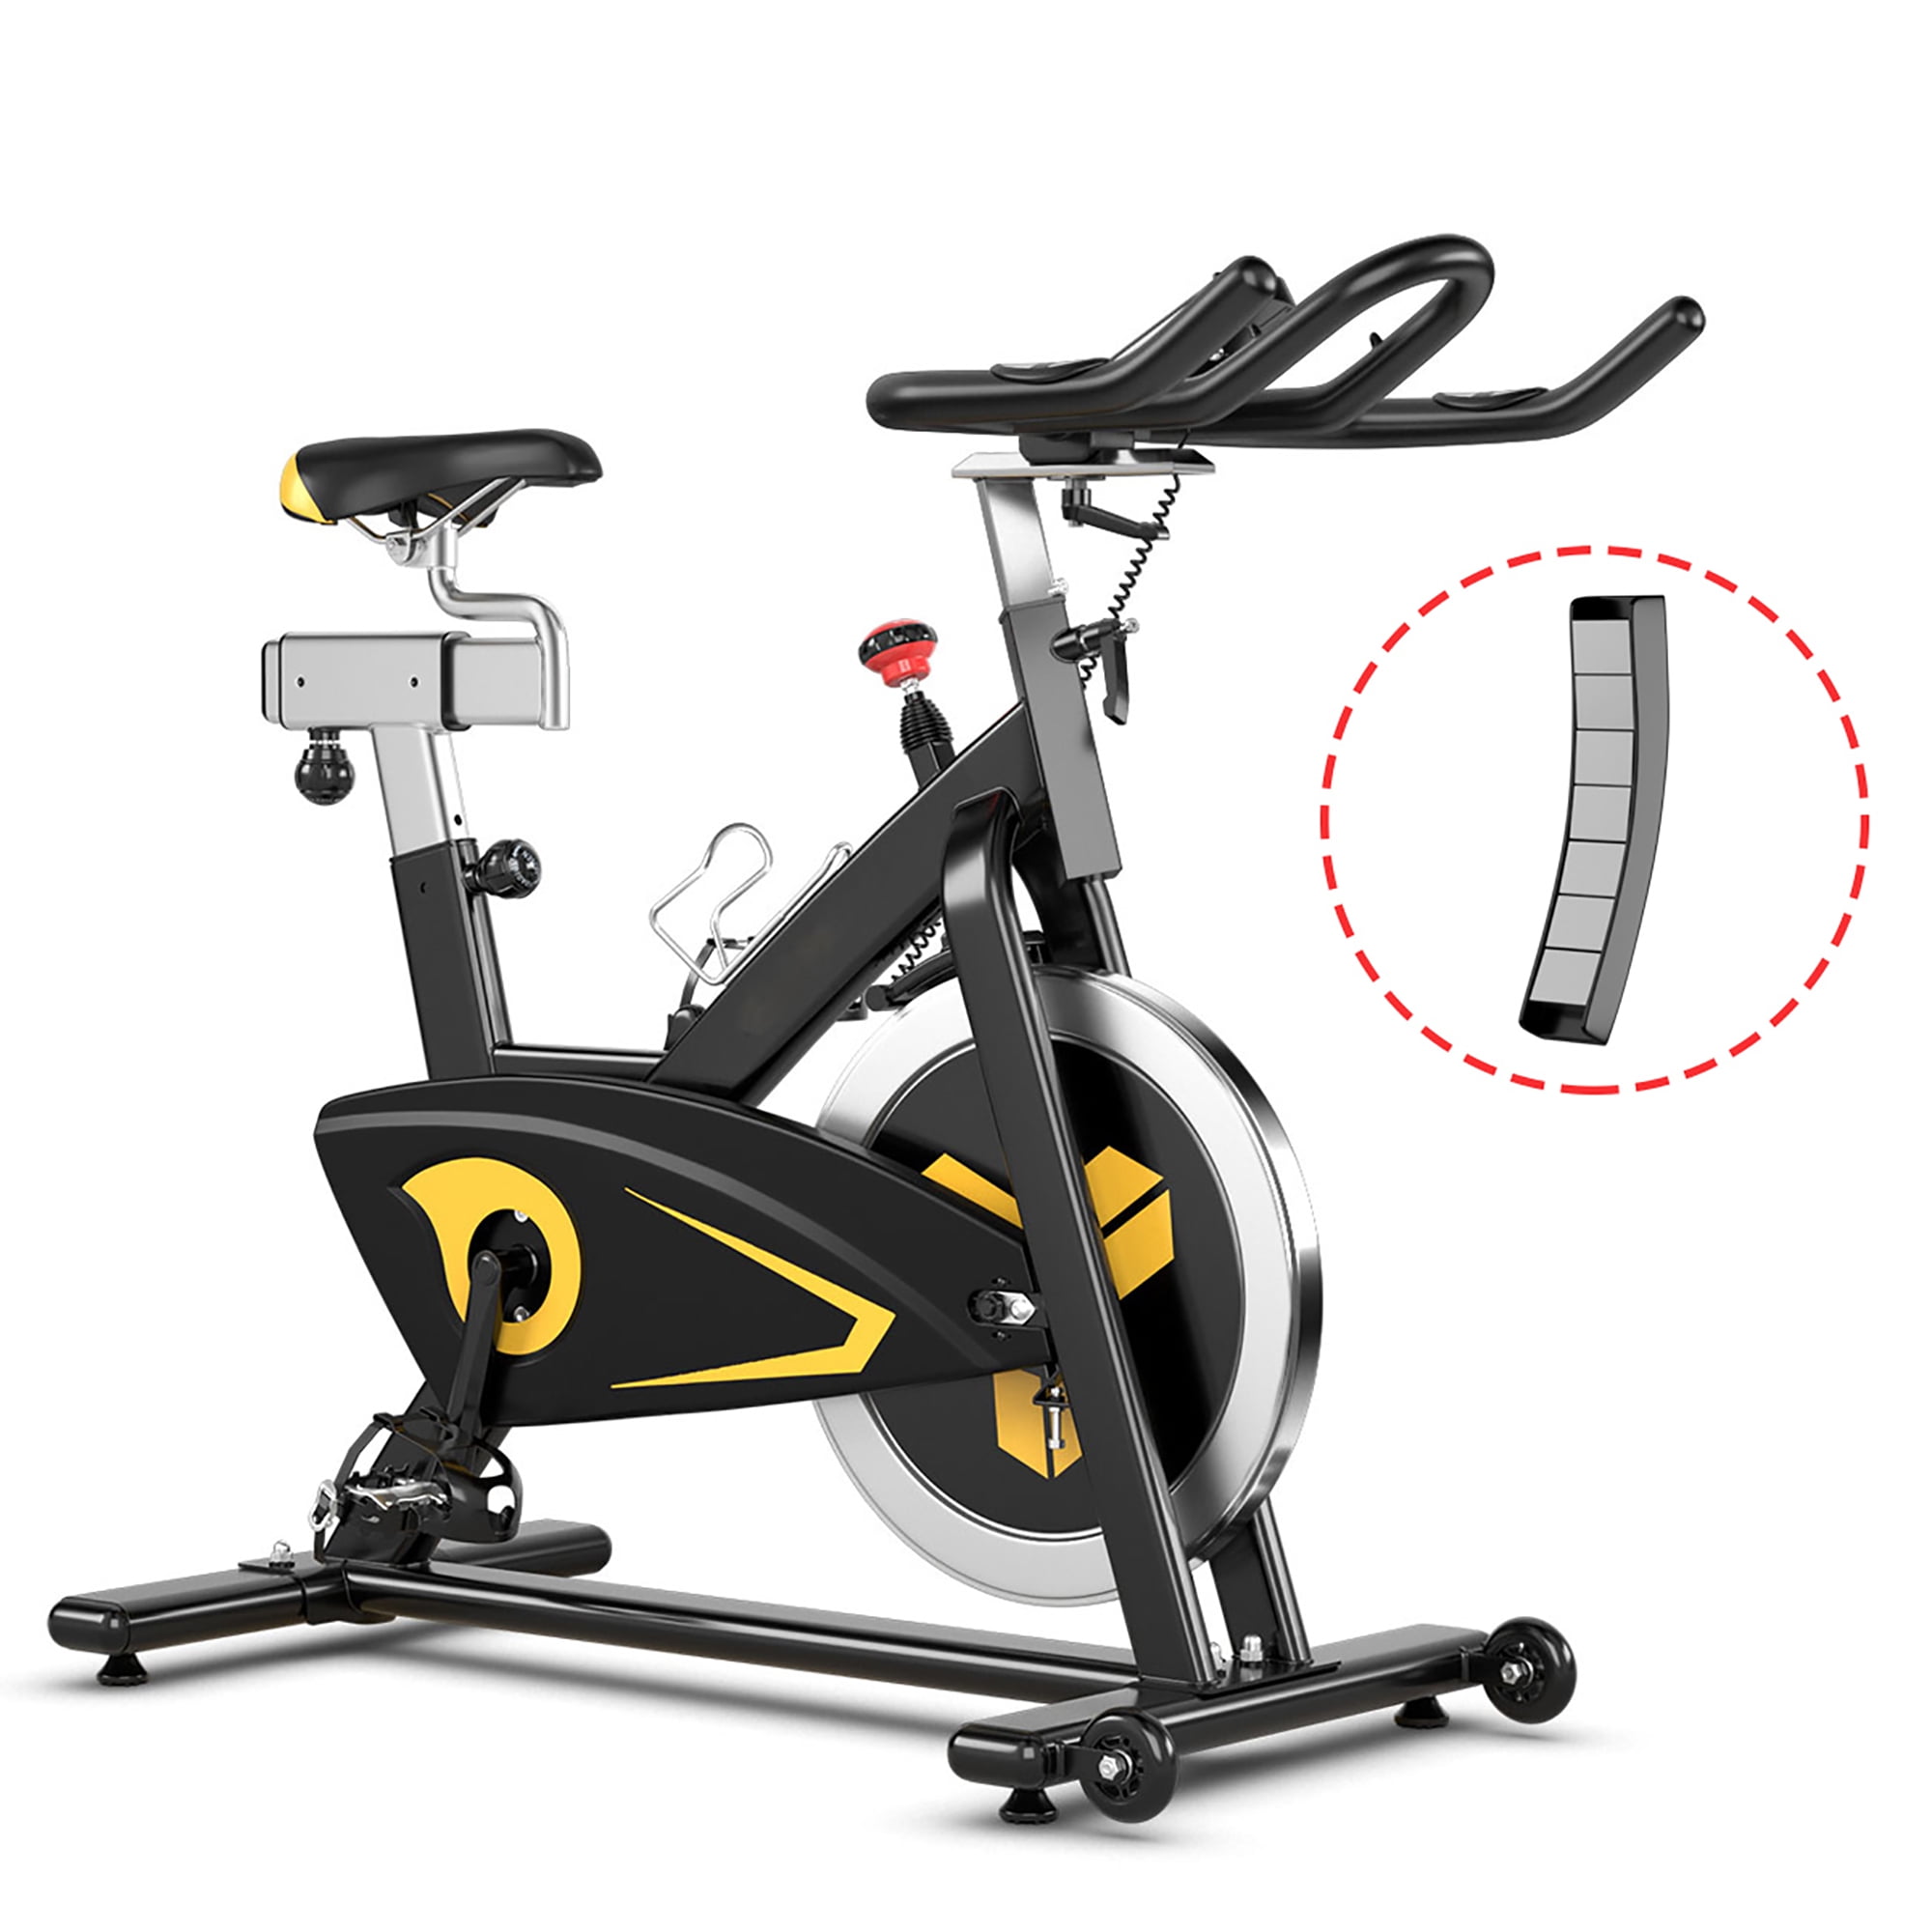 Details about   Stationary Exercise Bike Bicycle Trainer Fitness Cardio Cycling Training Home US 